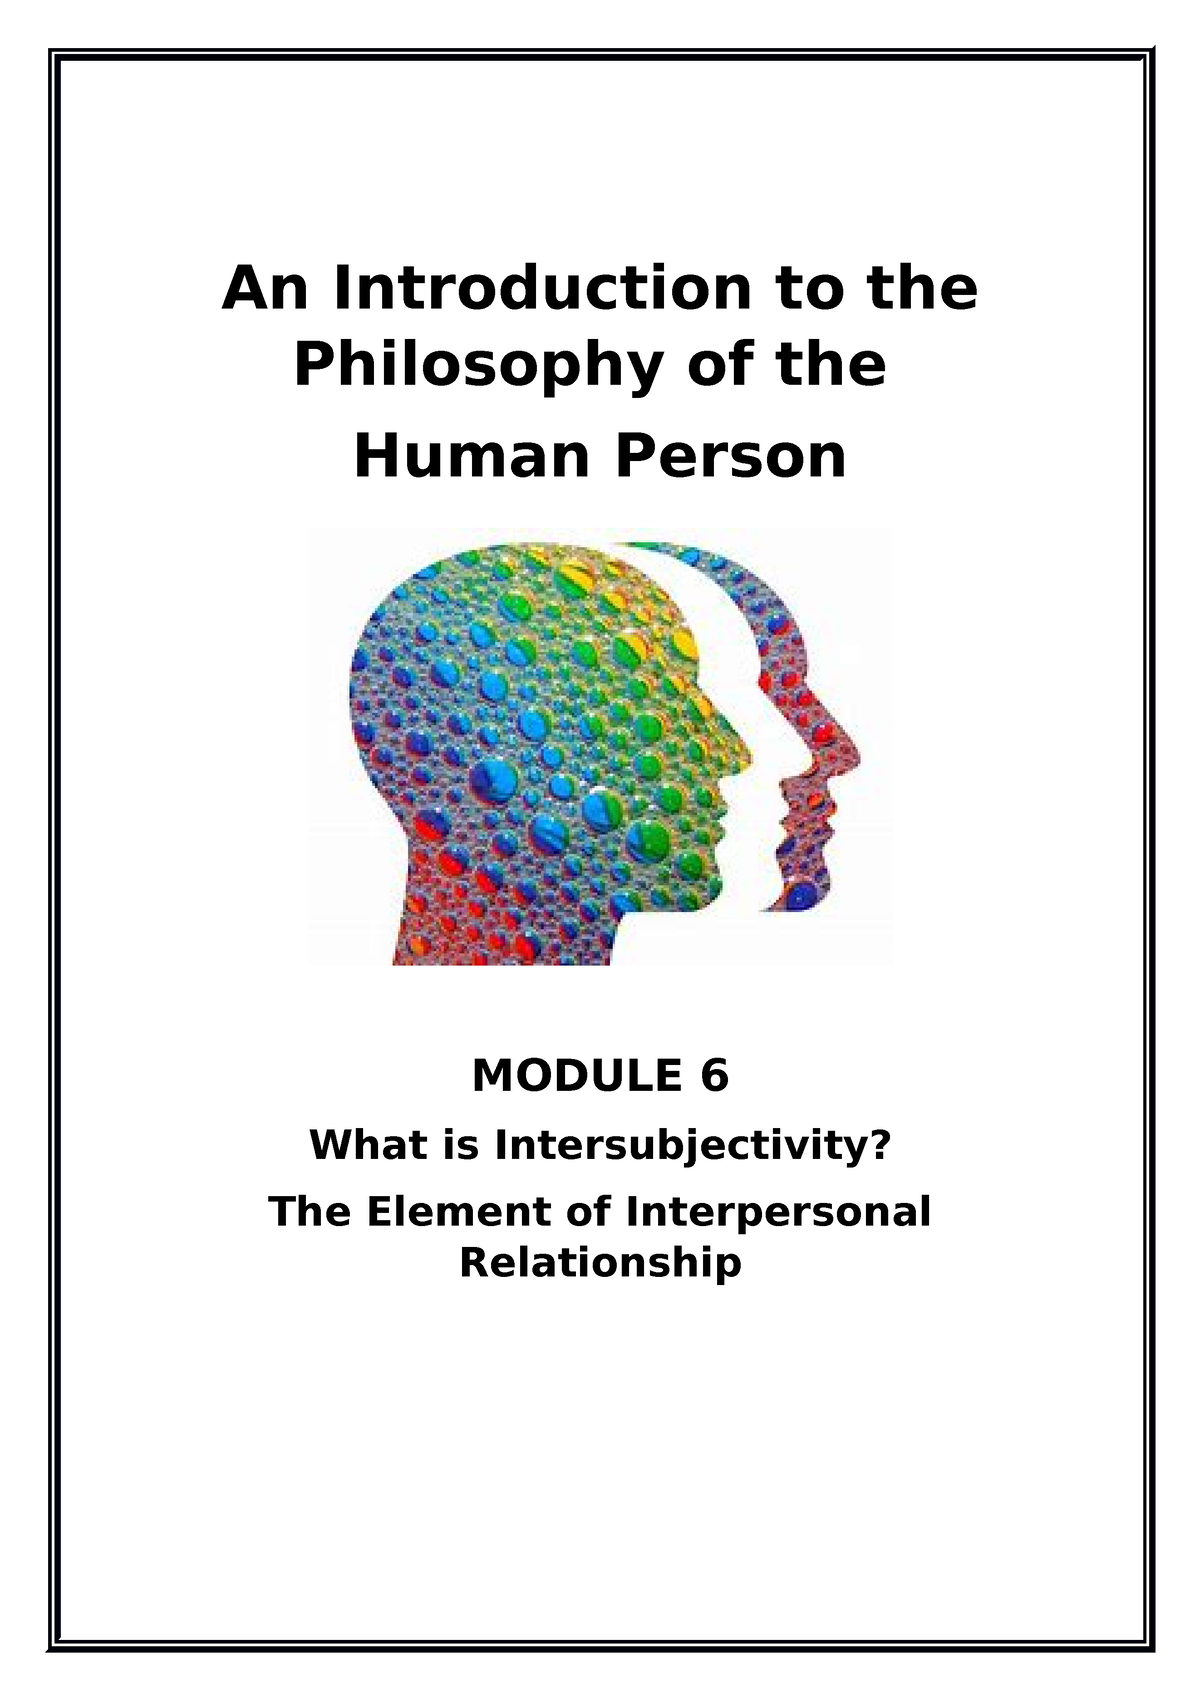 Module 6 Intersubjectivity An Introduction To The Philosophy Of The Human Person Module 6 3005